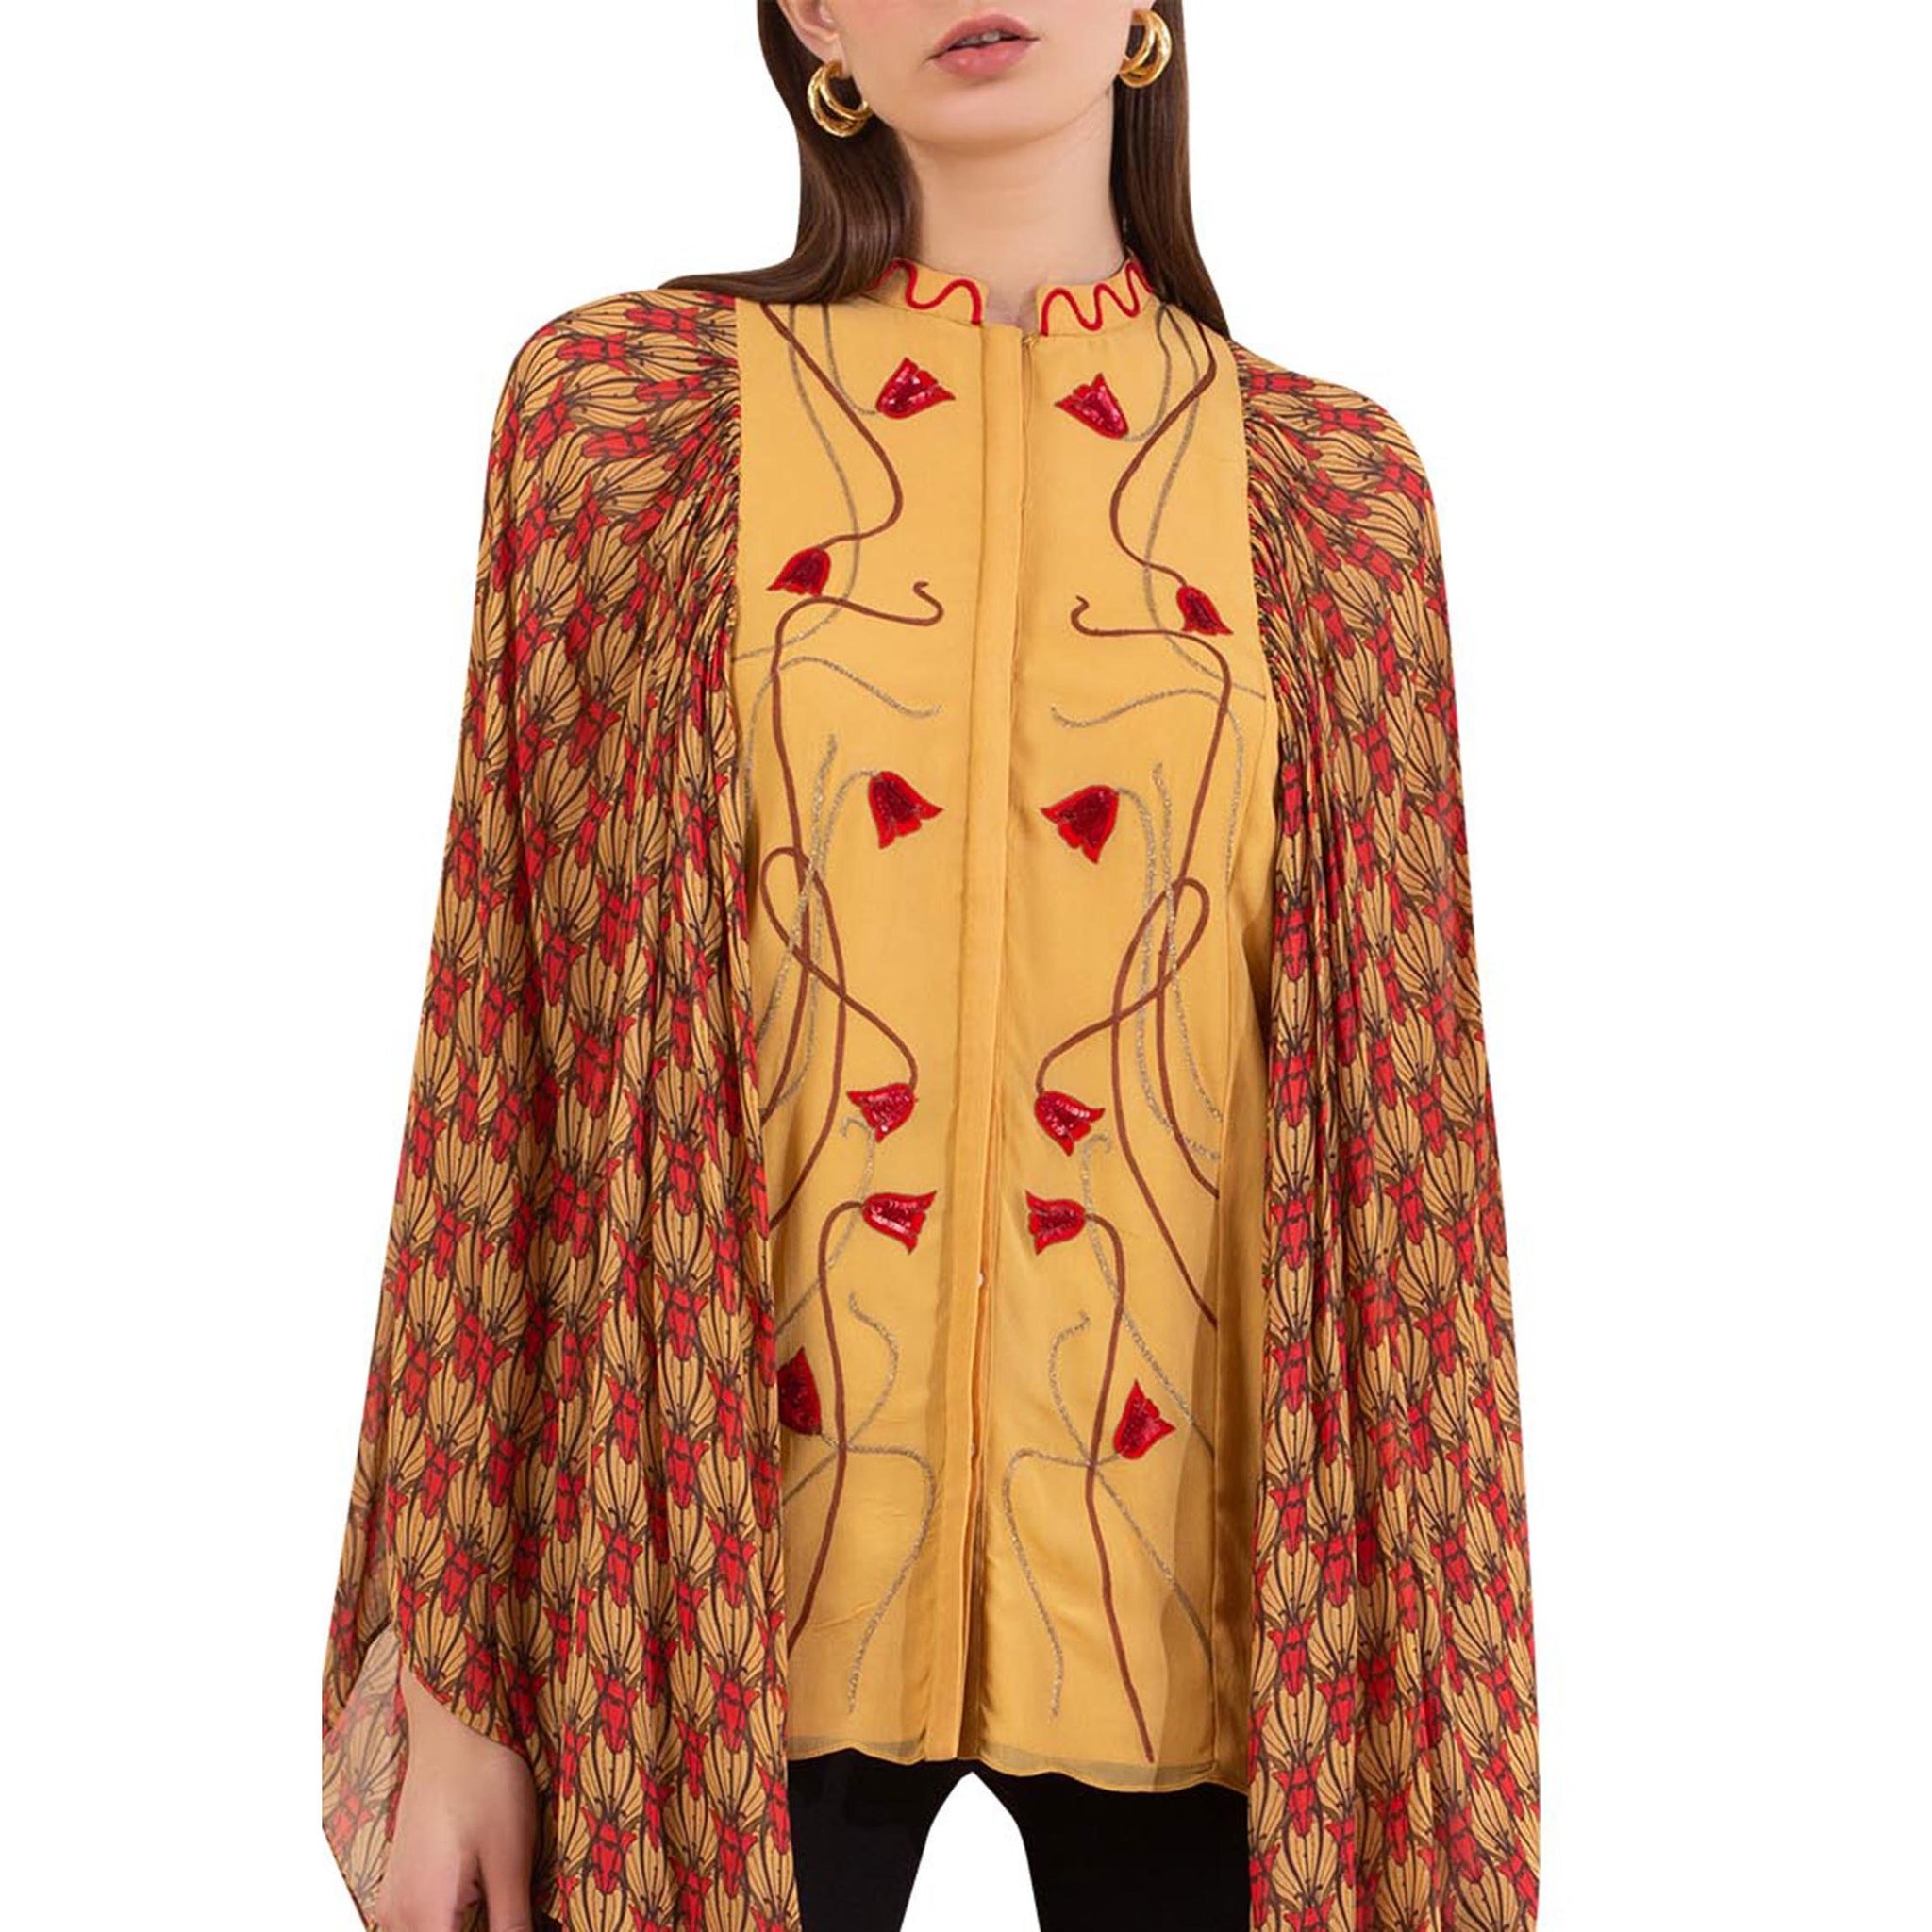 Hand Embroidered Tunic with Exaggerated Printed Sleeves